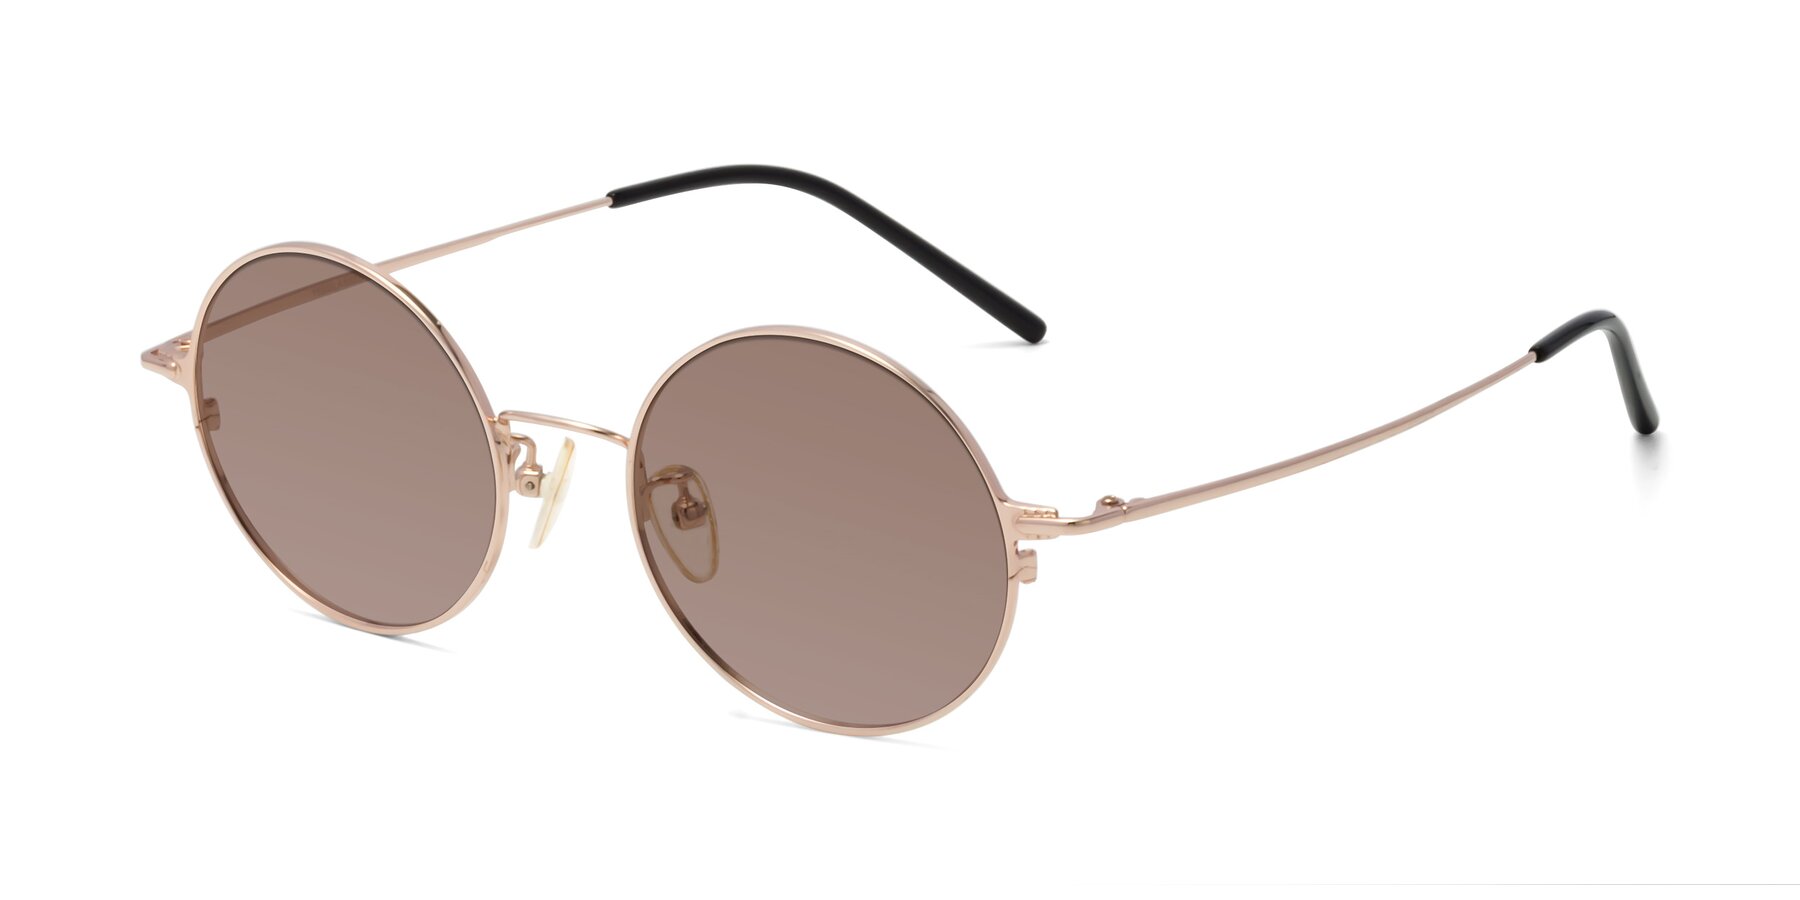 Angle of 18009 in Rose Gold with Medium Brown Tinted Lenses